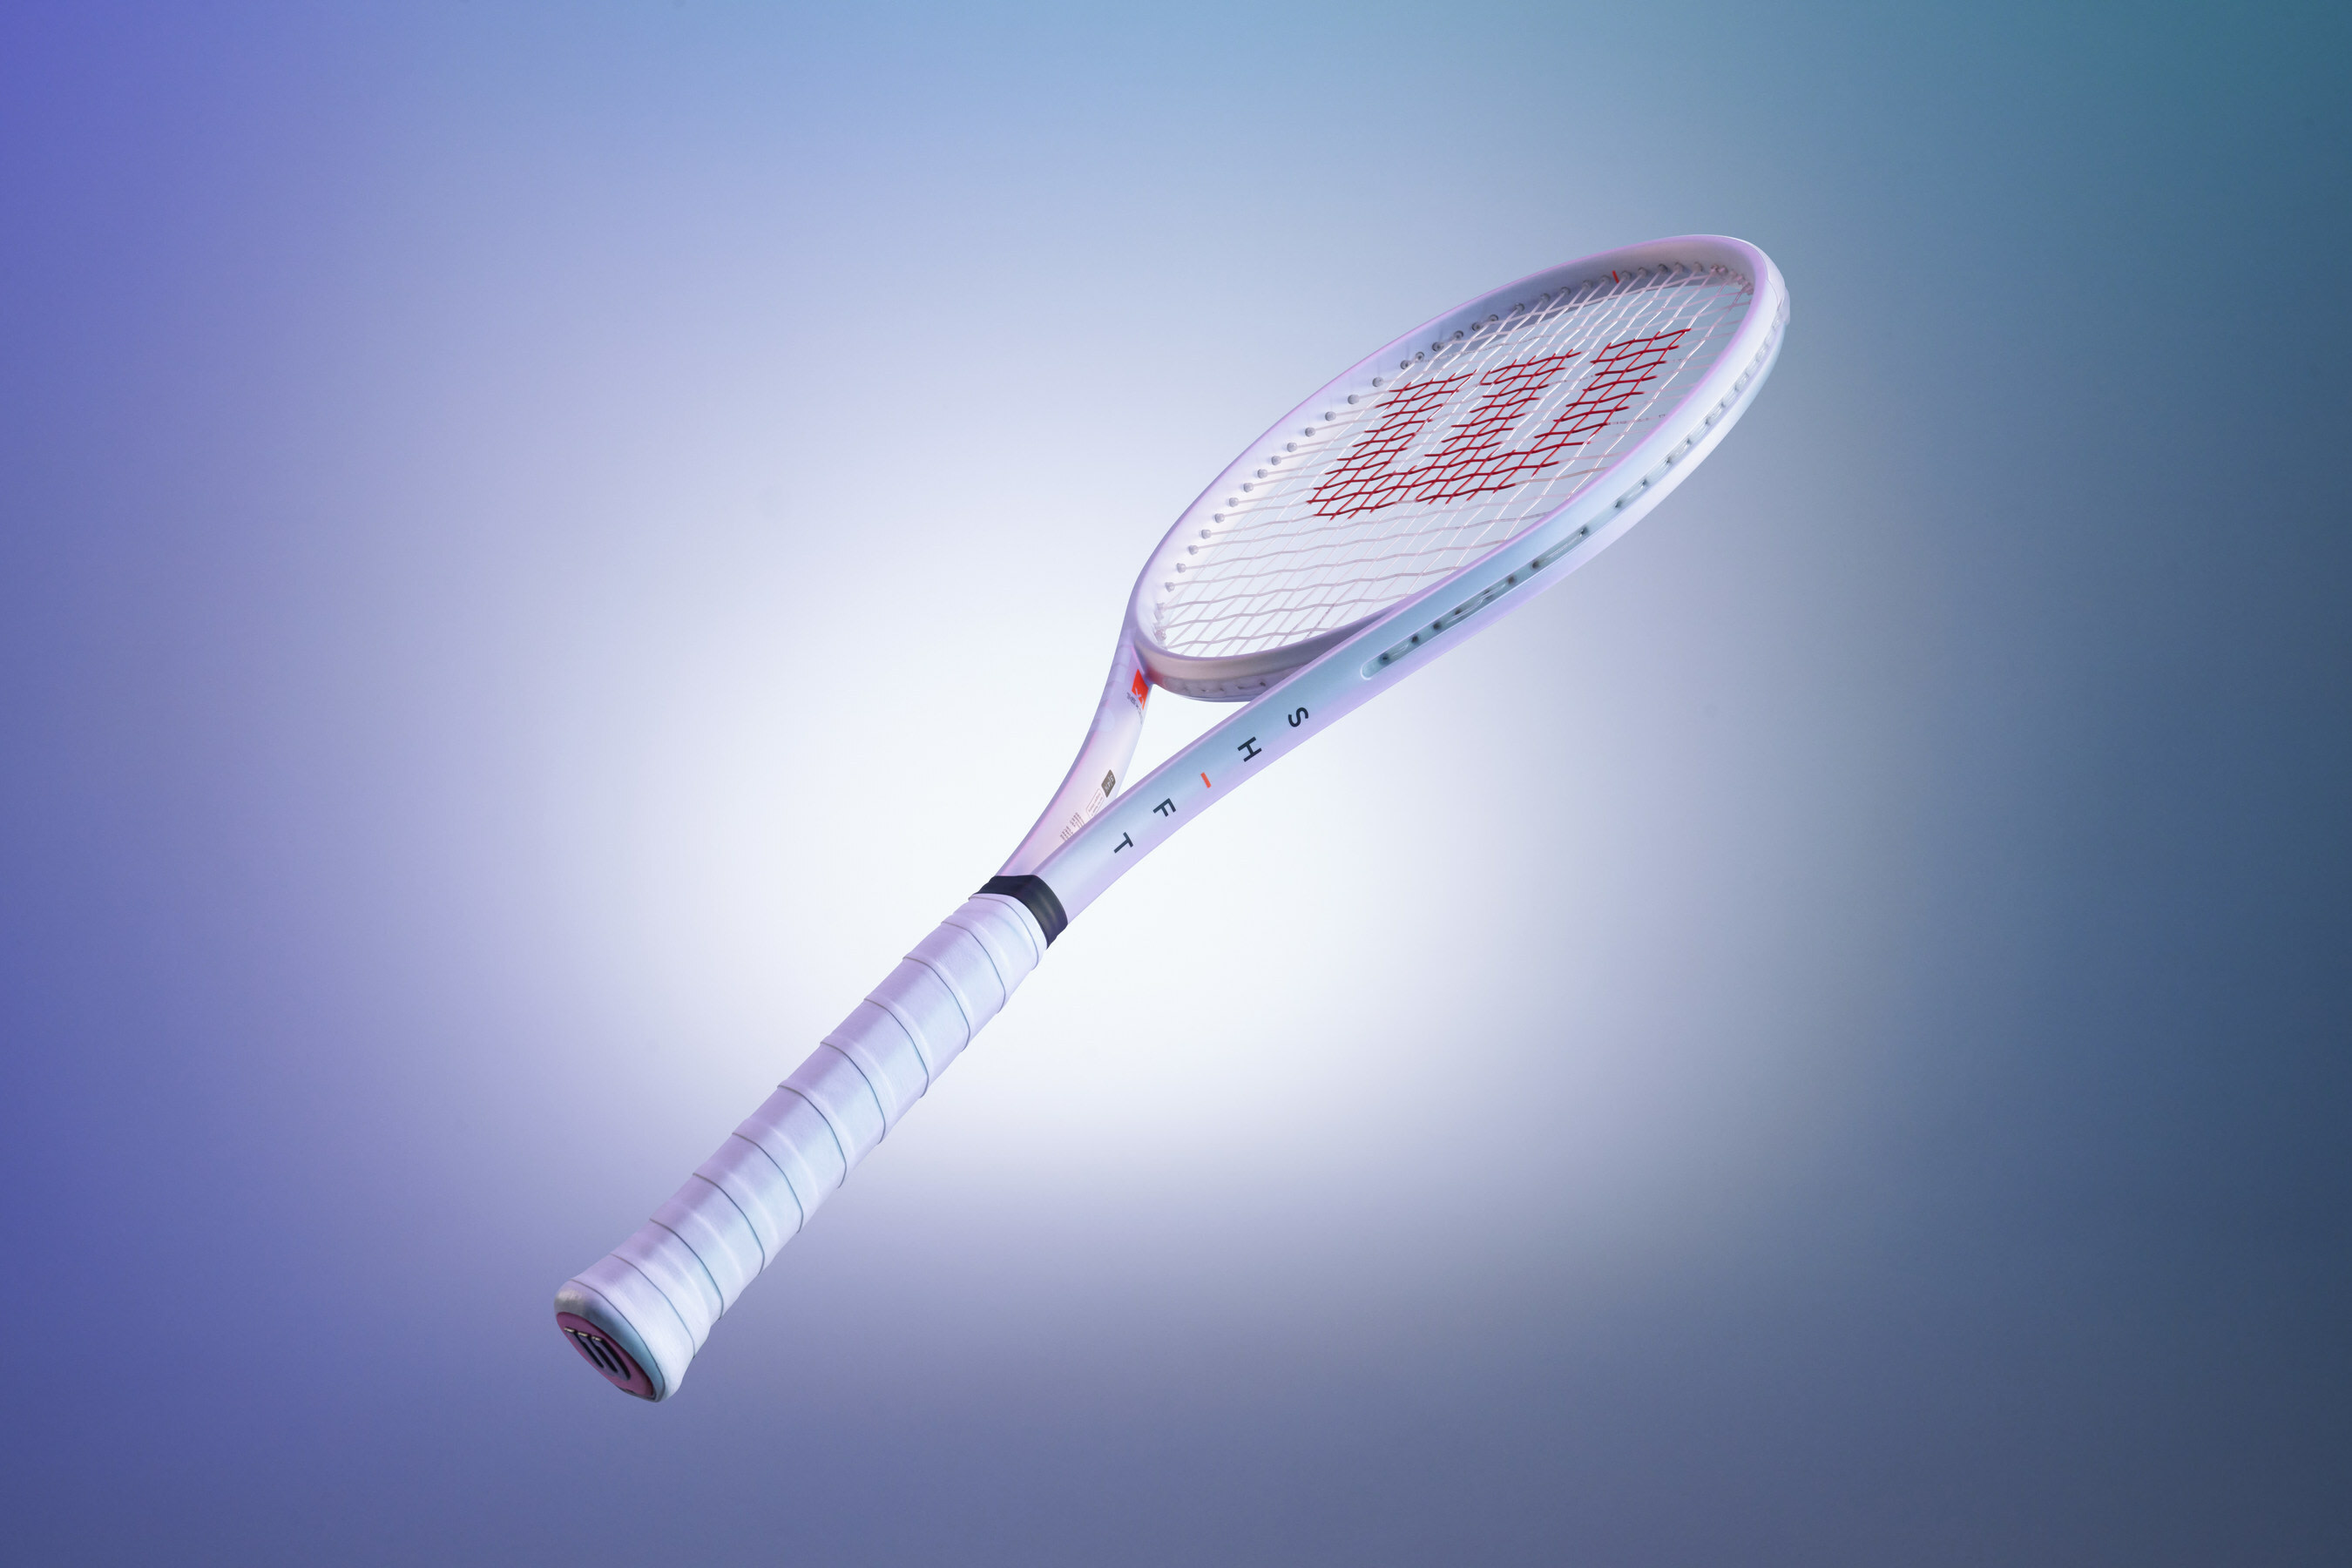 Ready for takeoff: Wilson launches Shift v1 racquet franchise